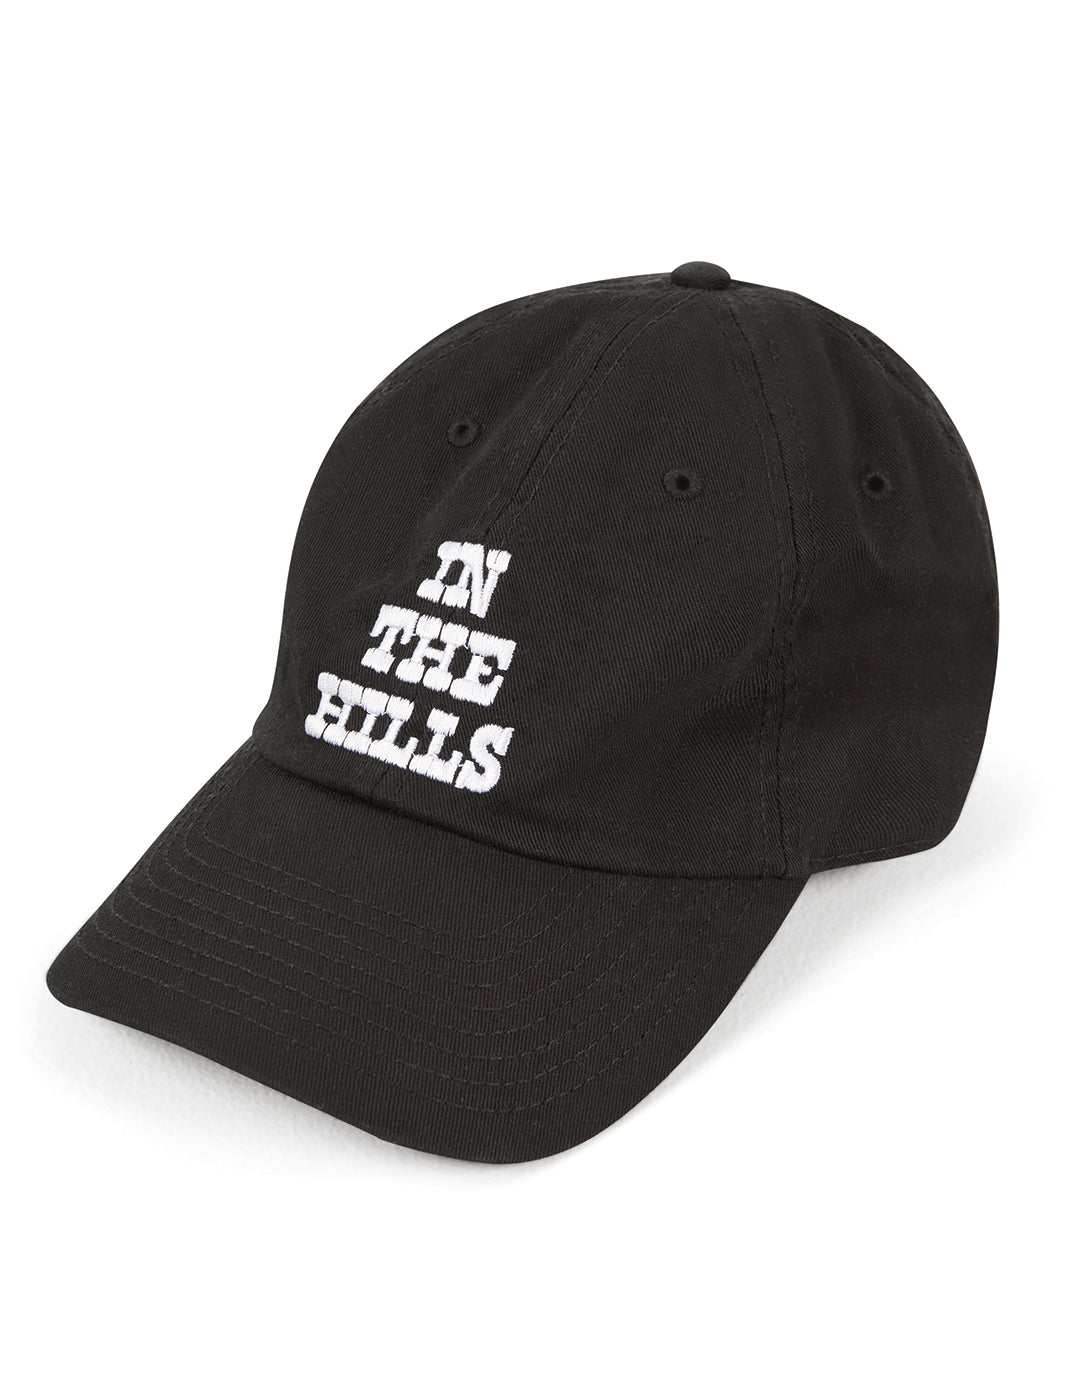 THE HILLS HAT IN BLACK COTTON TWILL